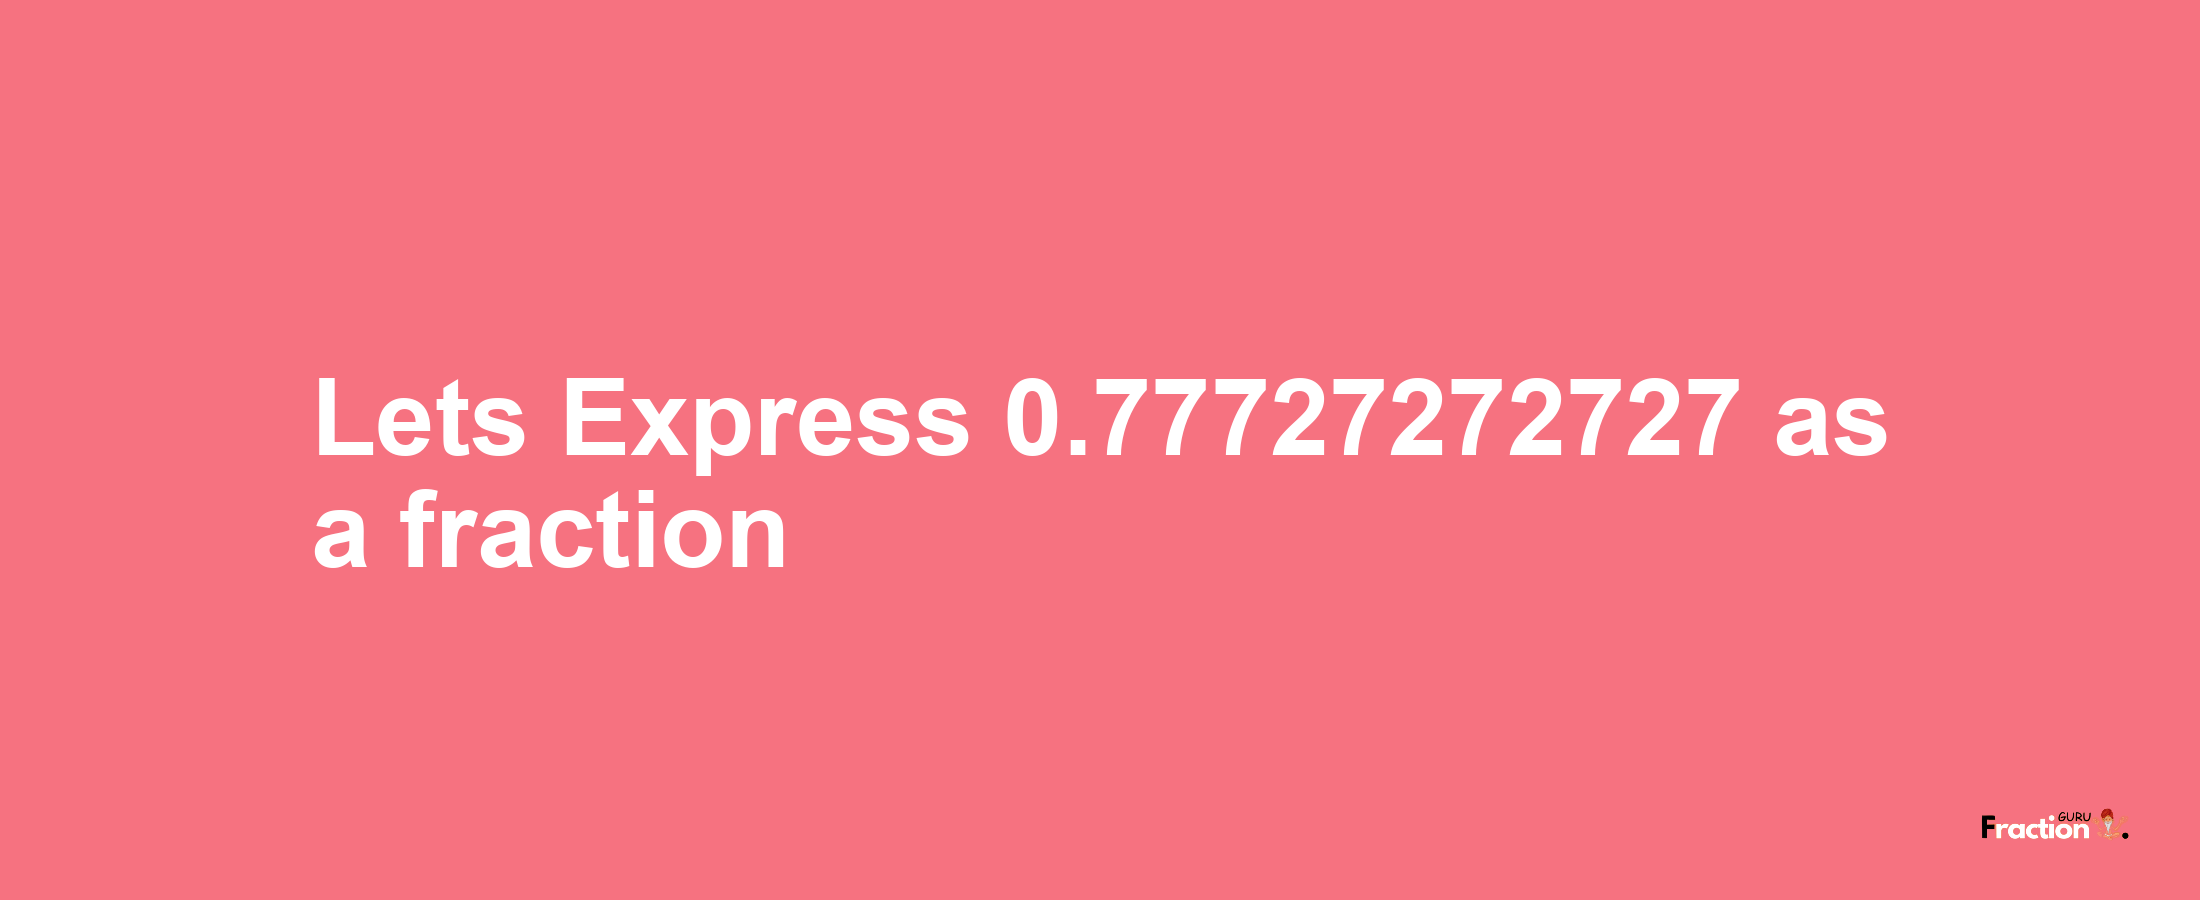 Lets Express 0.77727272727 as afraction